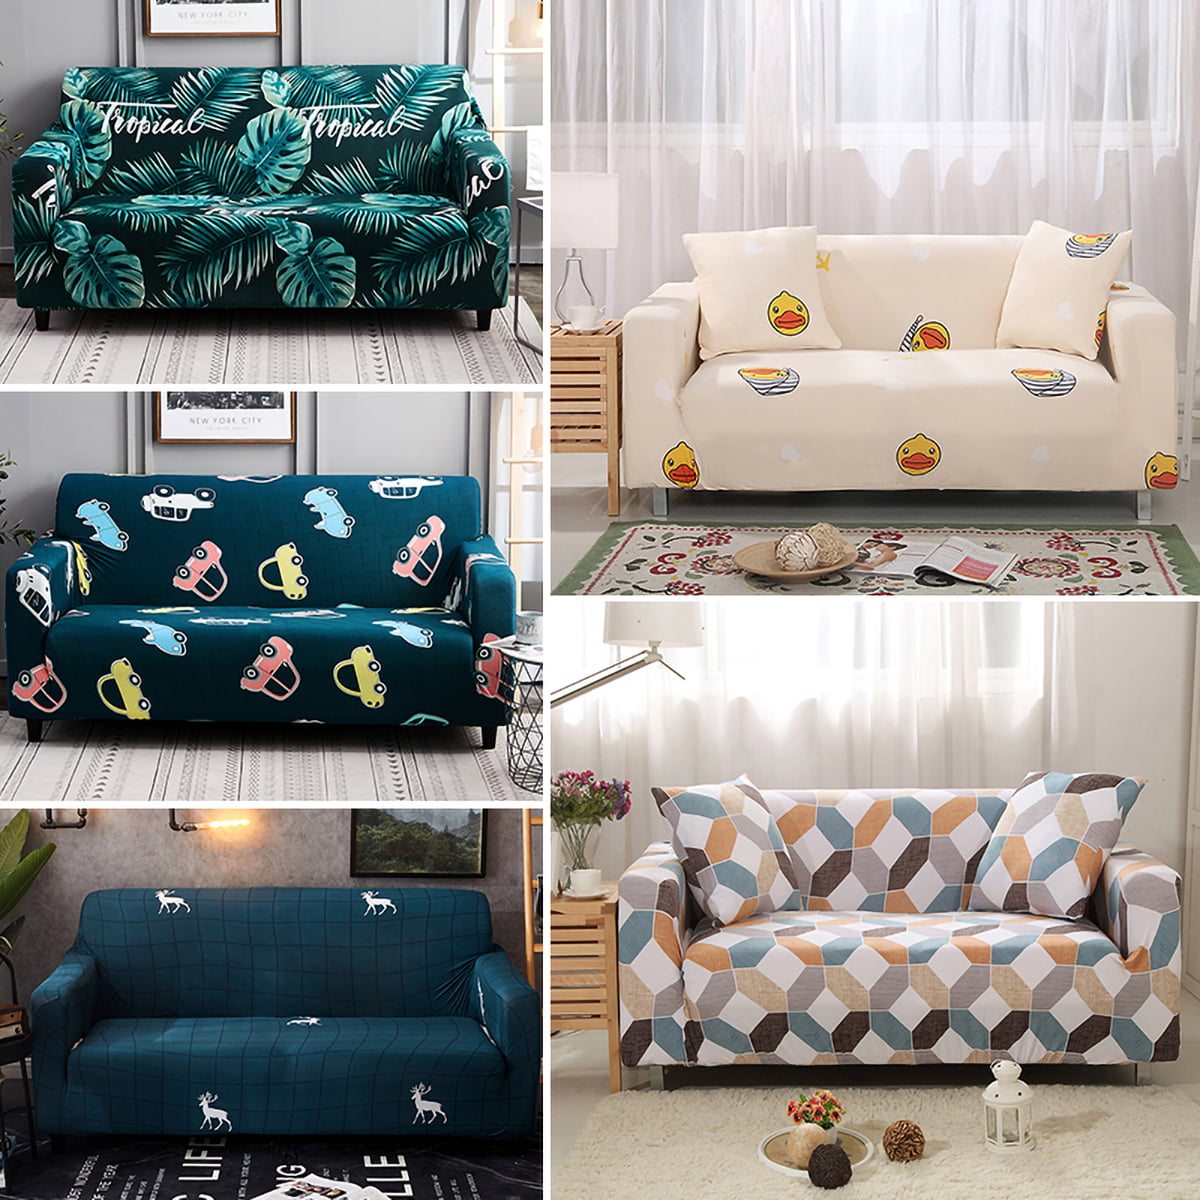 Details about   Love Hearts Printed Seater Couch Sofa Covers High Stretch Slipcover Protector 